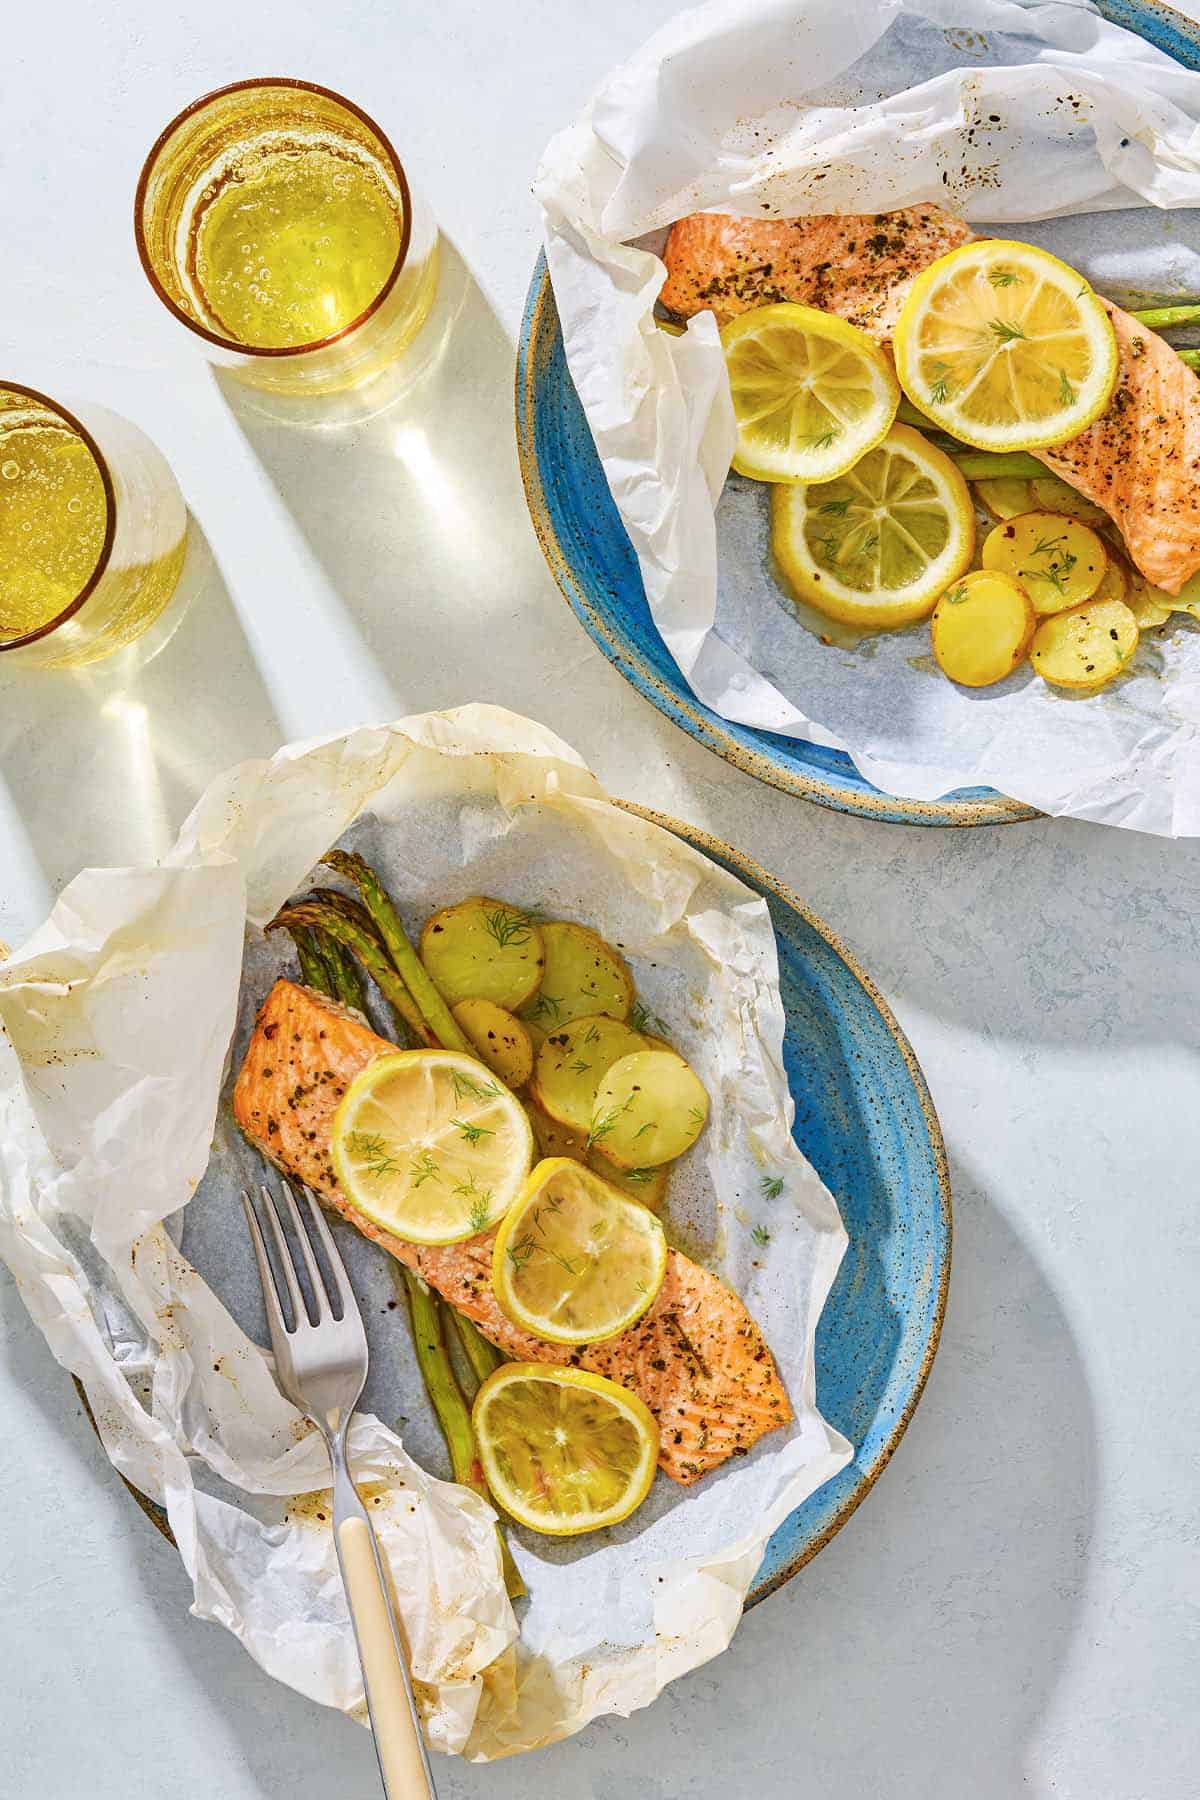 Two plates of salmon en papillote topped with lemon wheels on beds of asparagus and potatoes, one with a fork. Next to this are two cups of water.